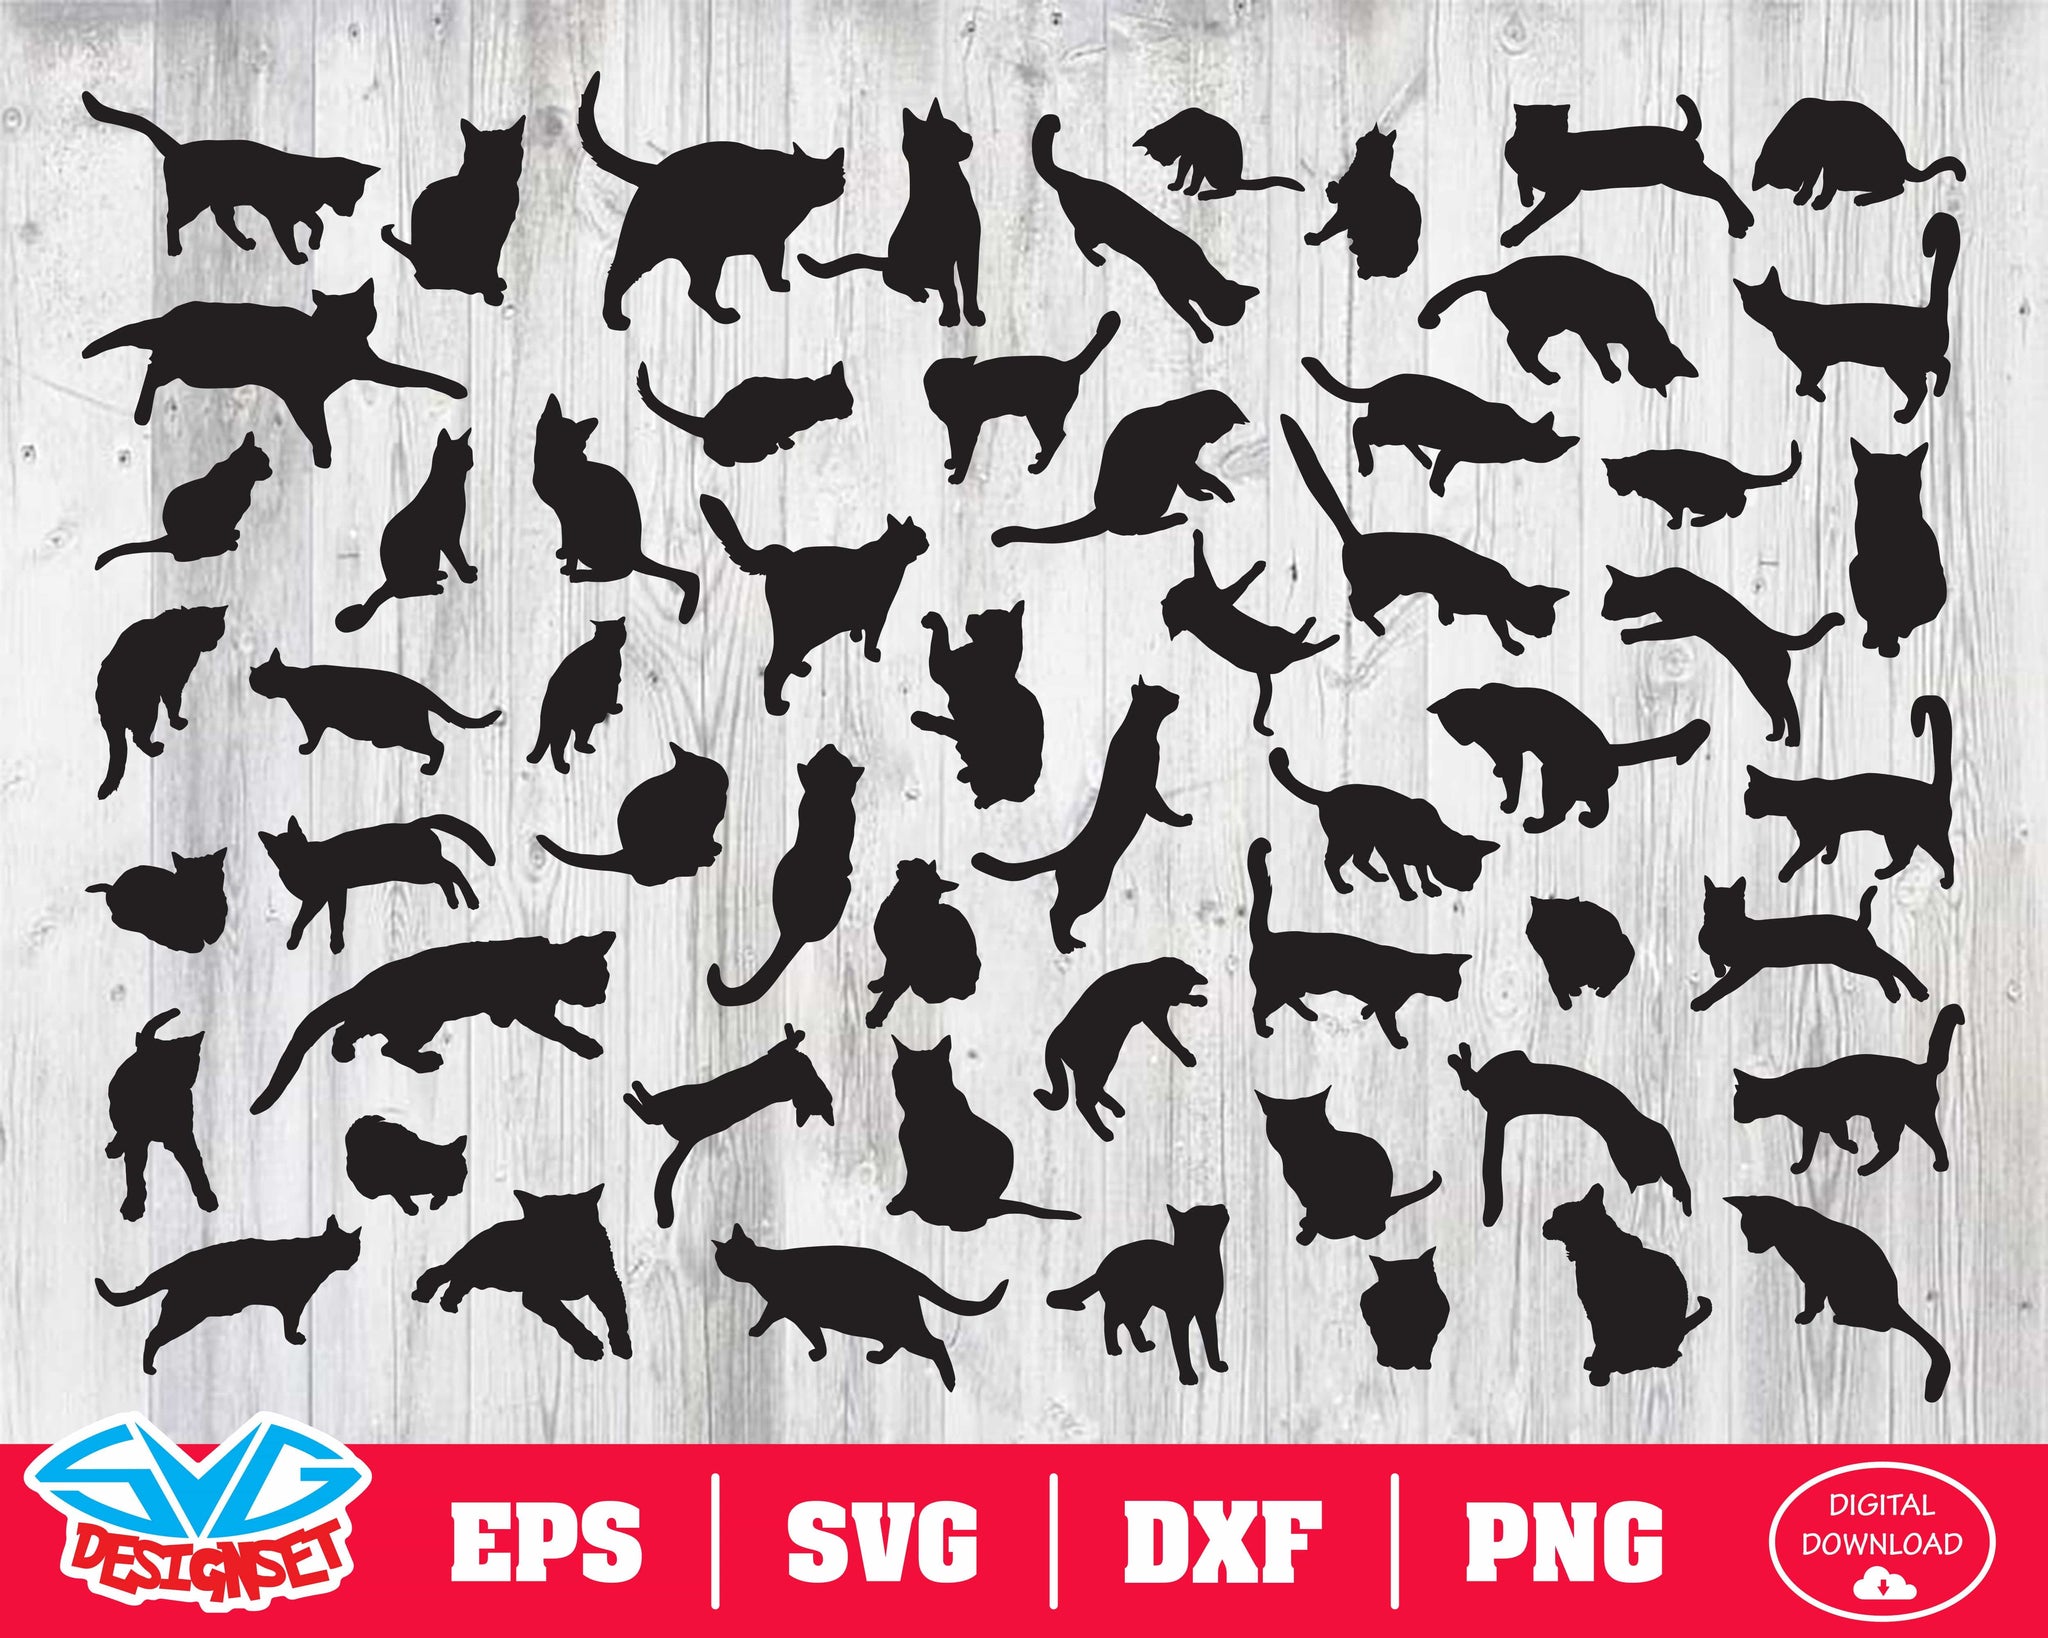 Cat Svg, Dxf, Eps, Png, Clipart, Silhouette and Cutfiles #1 - SVGDesignSets